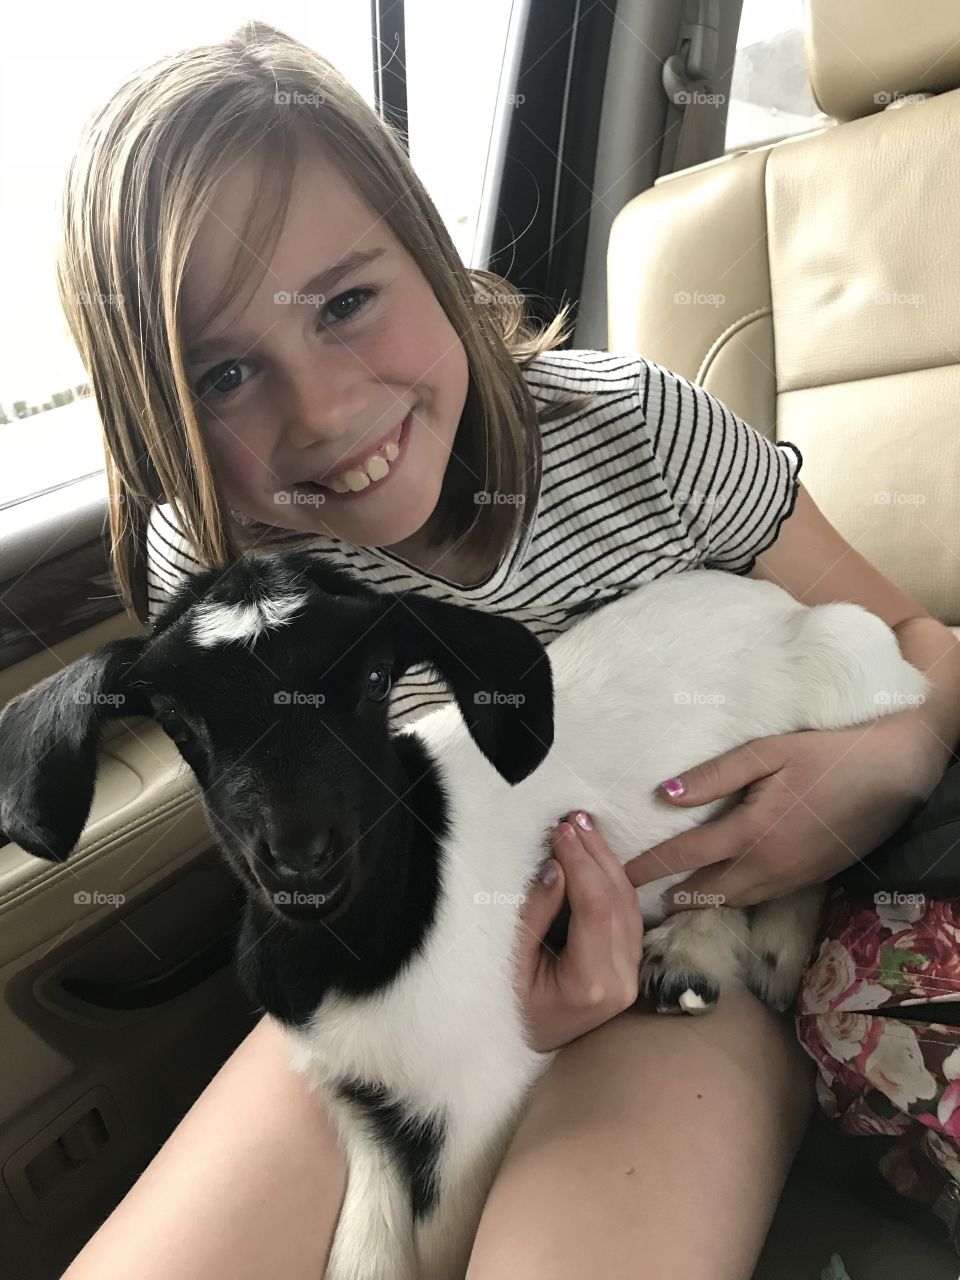 Girl and goat